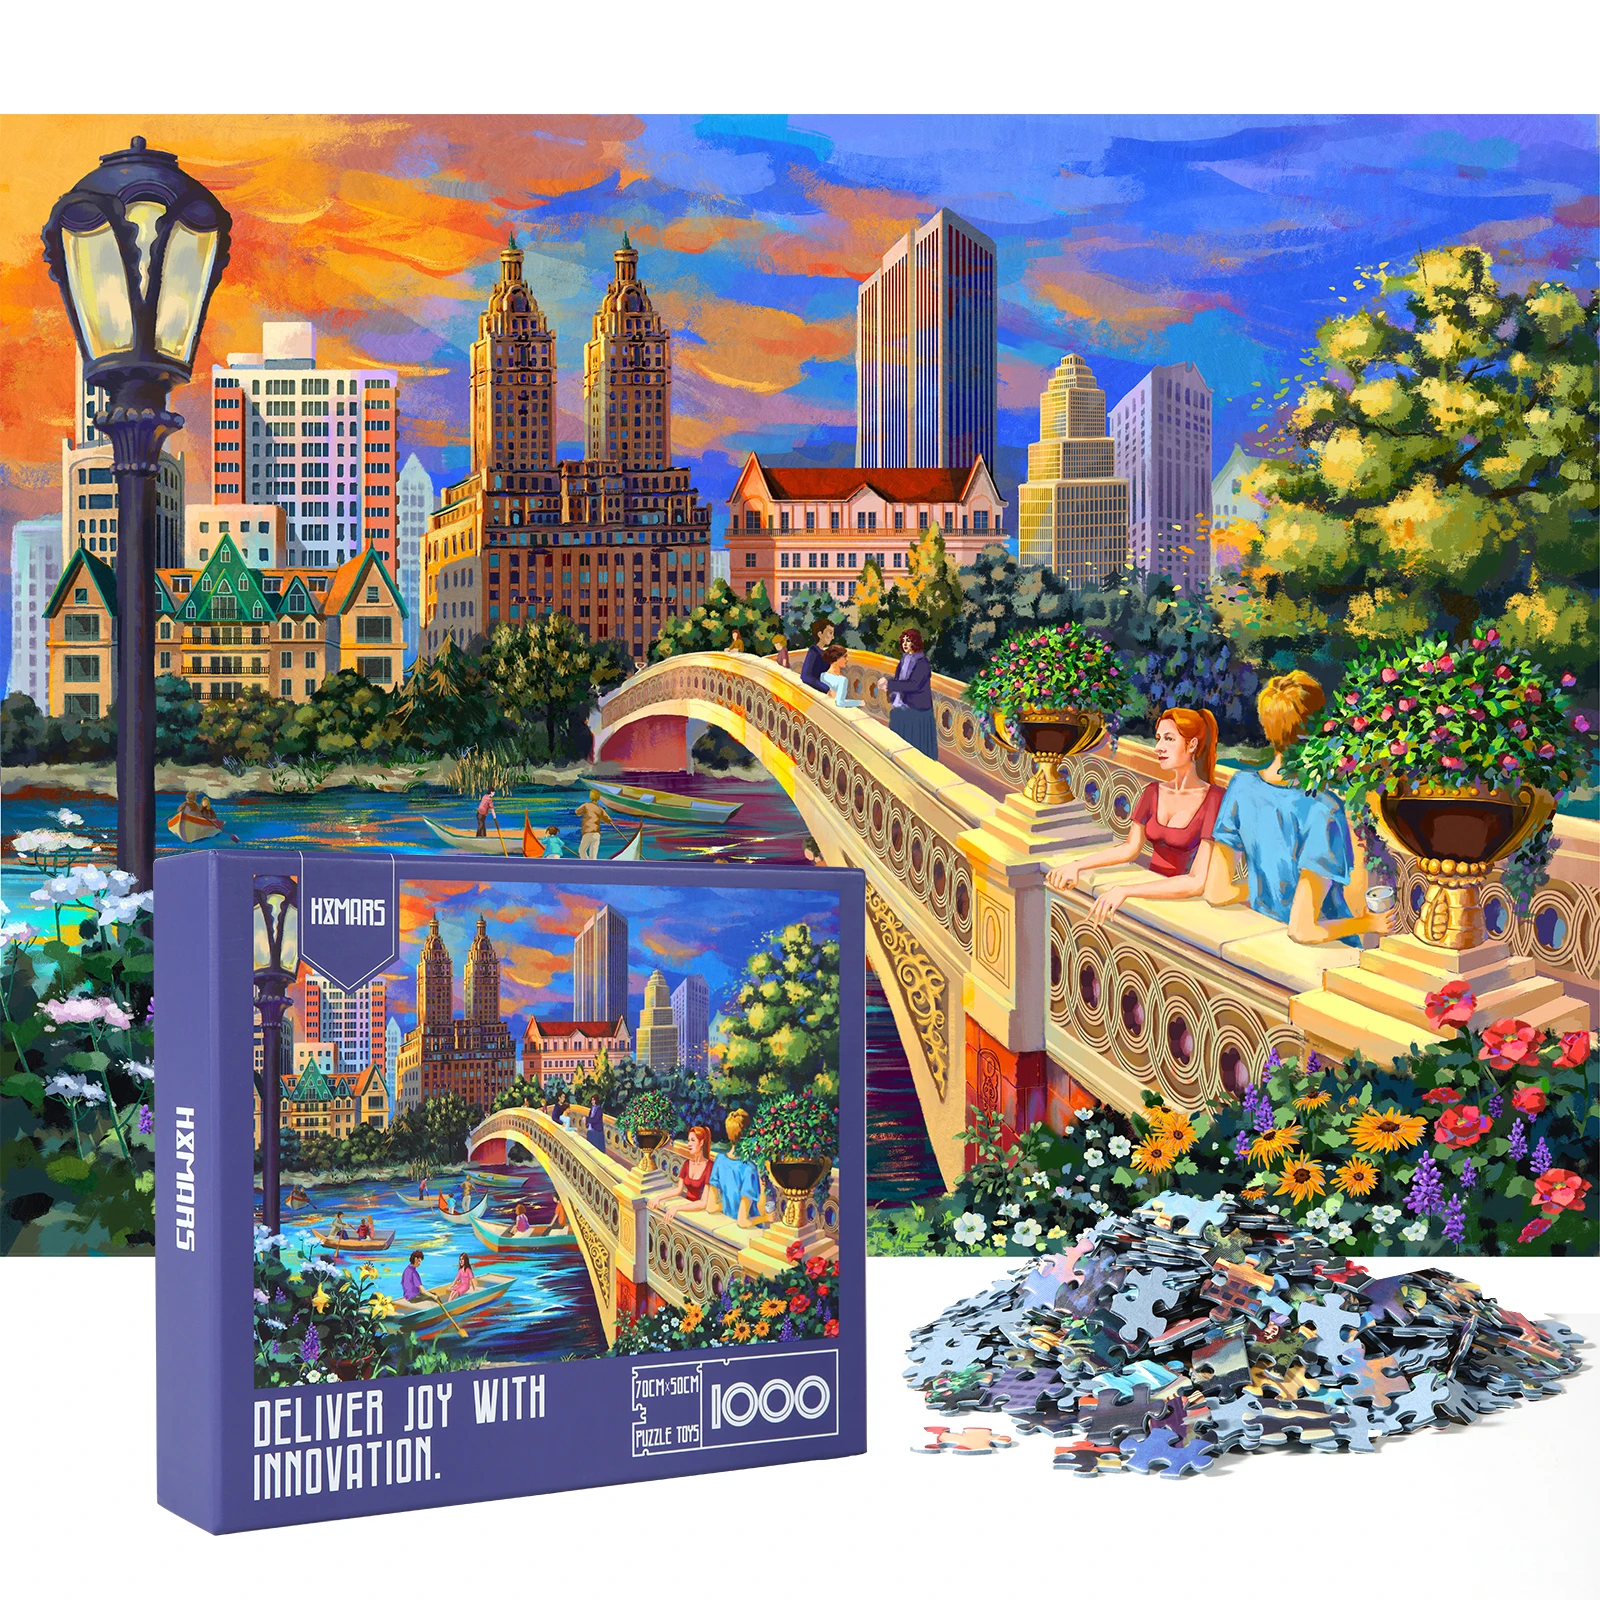 

HXMARS 1000 Piece Puzzle for Adults Kids, Large Challenging Puzzles Game for Family Illustrated Art Central Park of New York